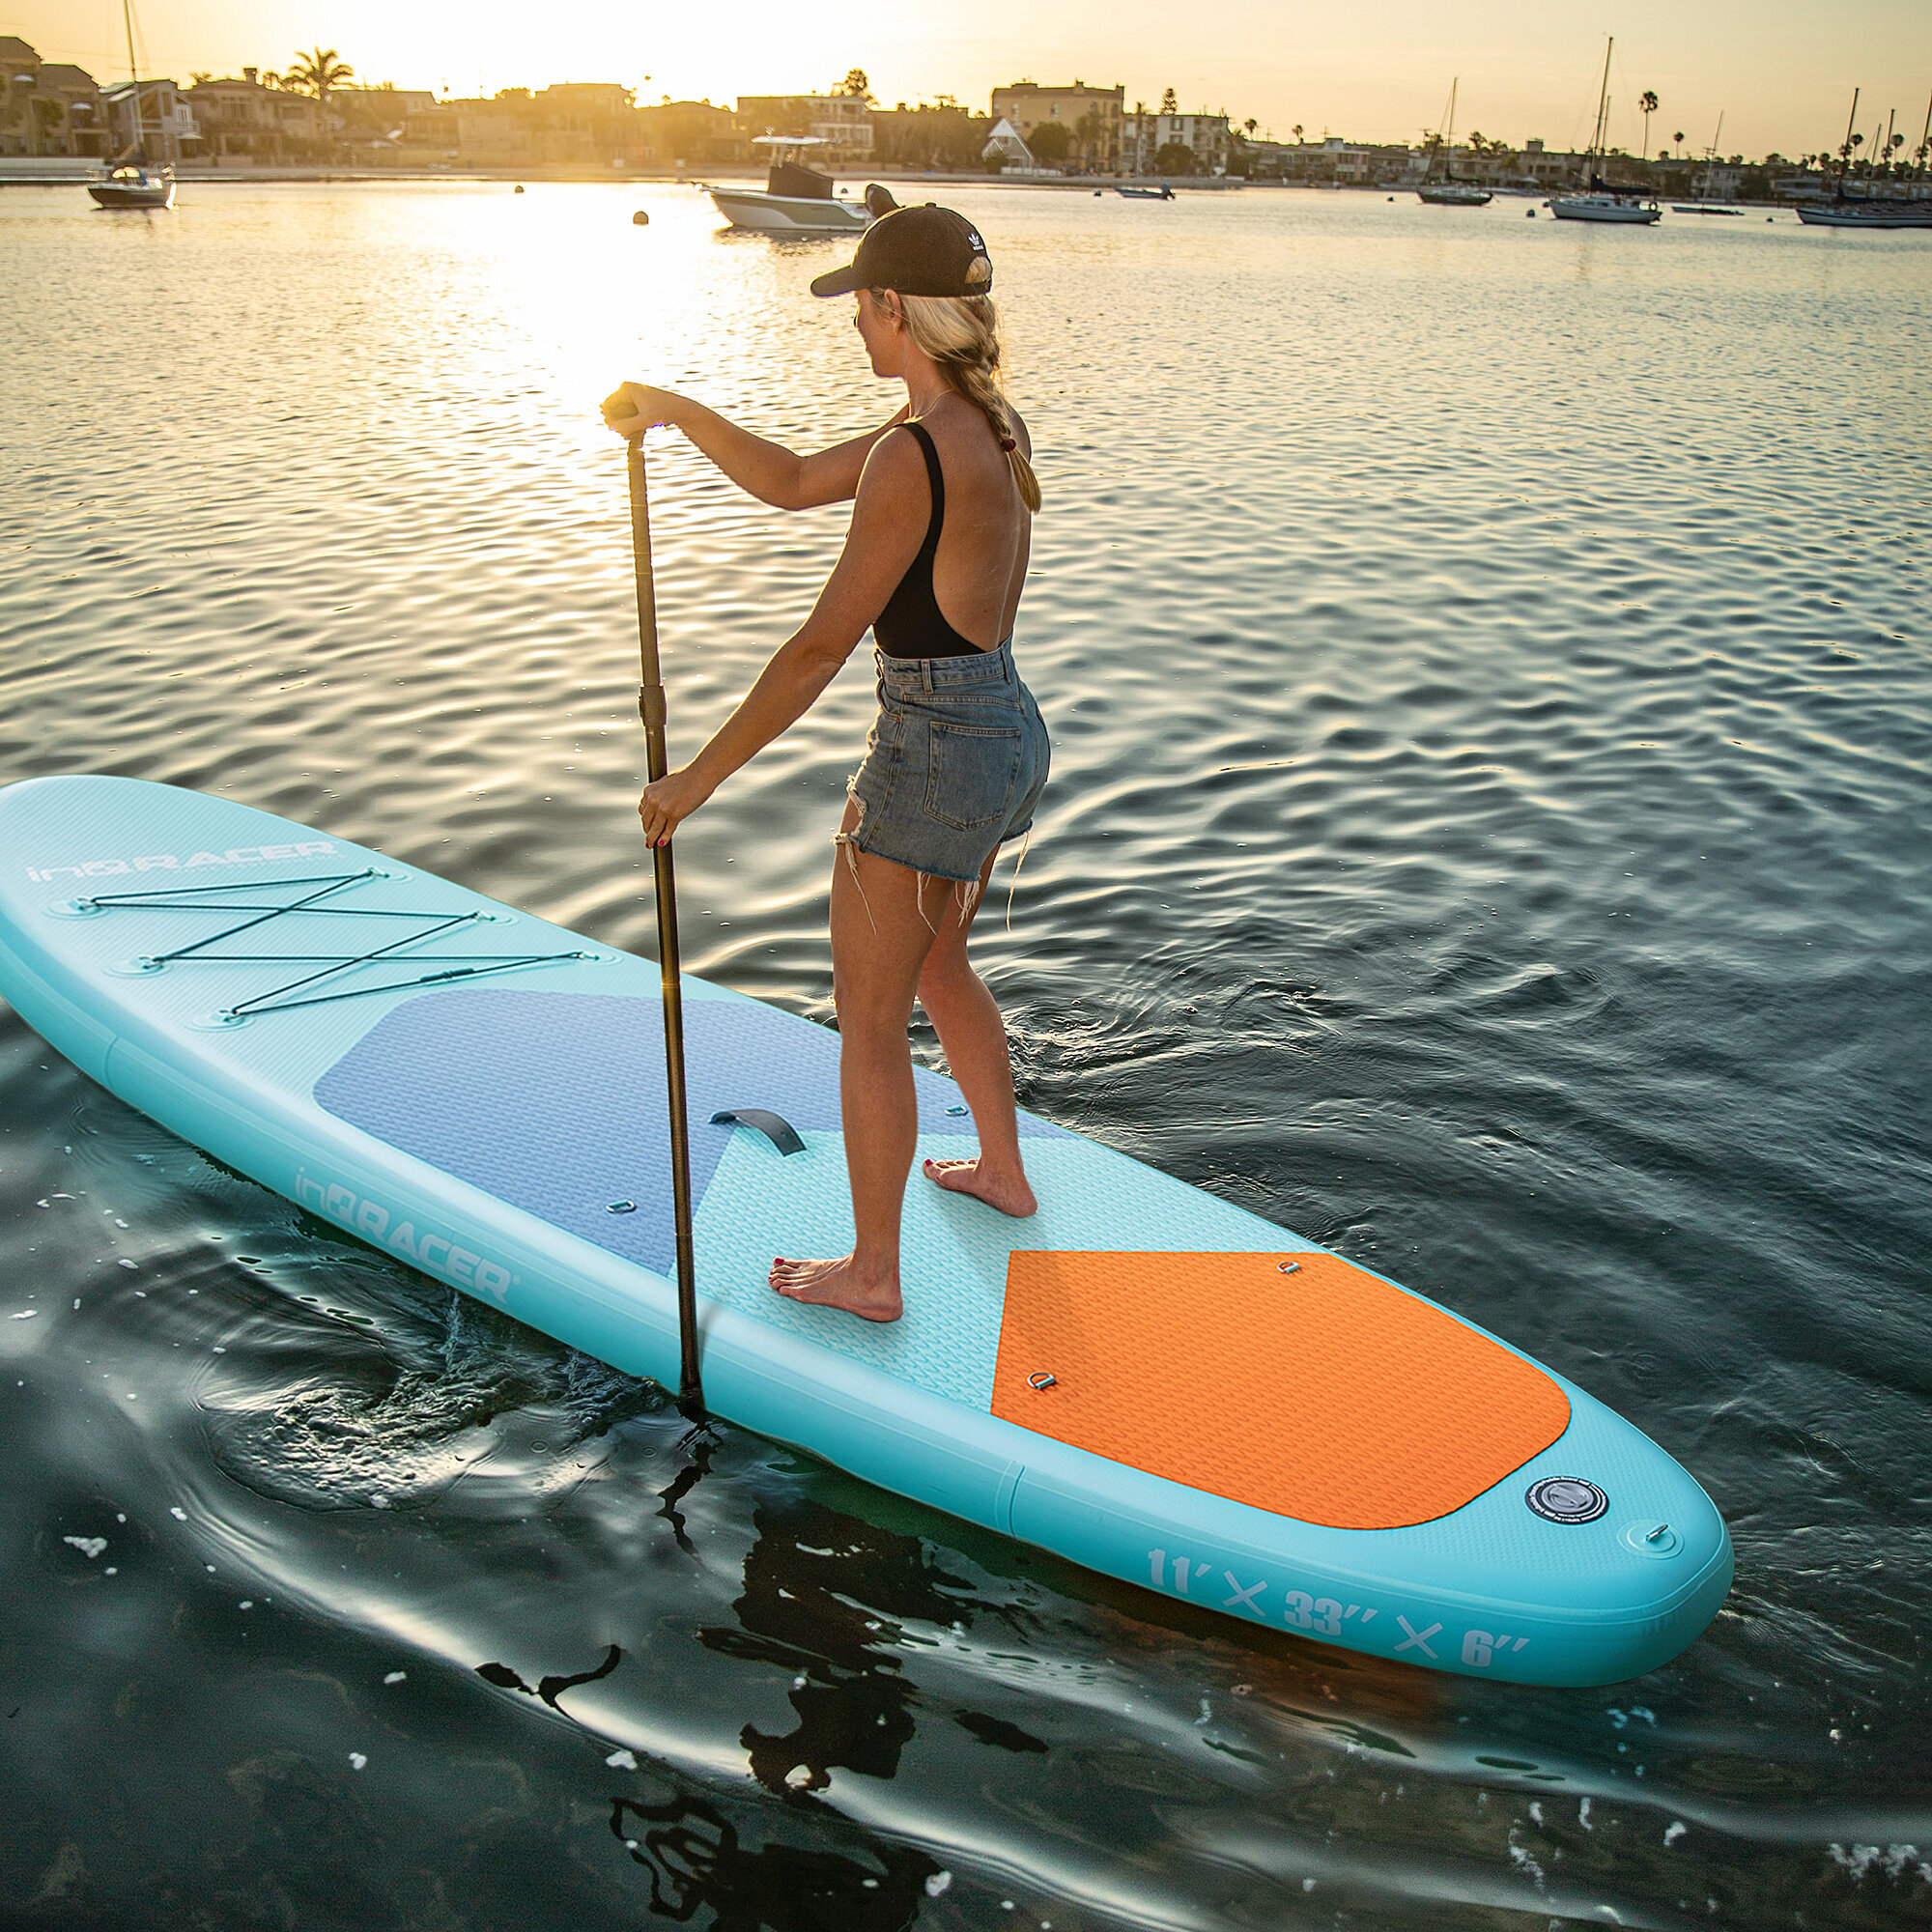 EDGEWOOD Inflatable Stand Up Paddle Board, 10'6/11'SUP Surfboard With  Premium SUP Accessories & Reviews - Wayfair Canada